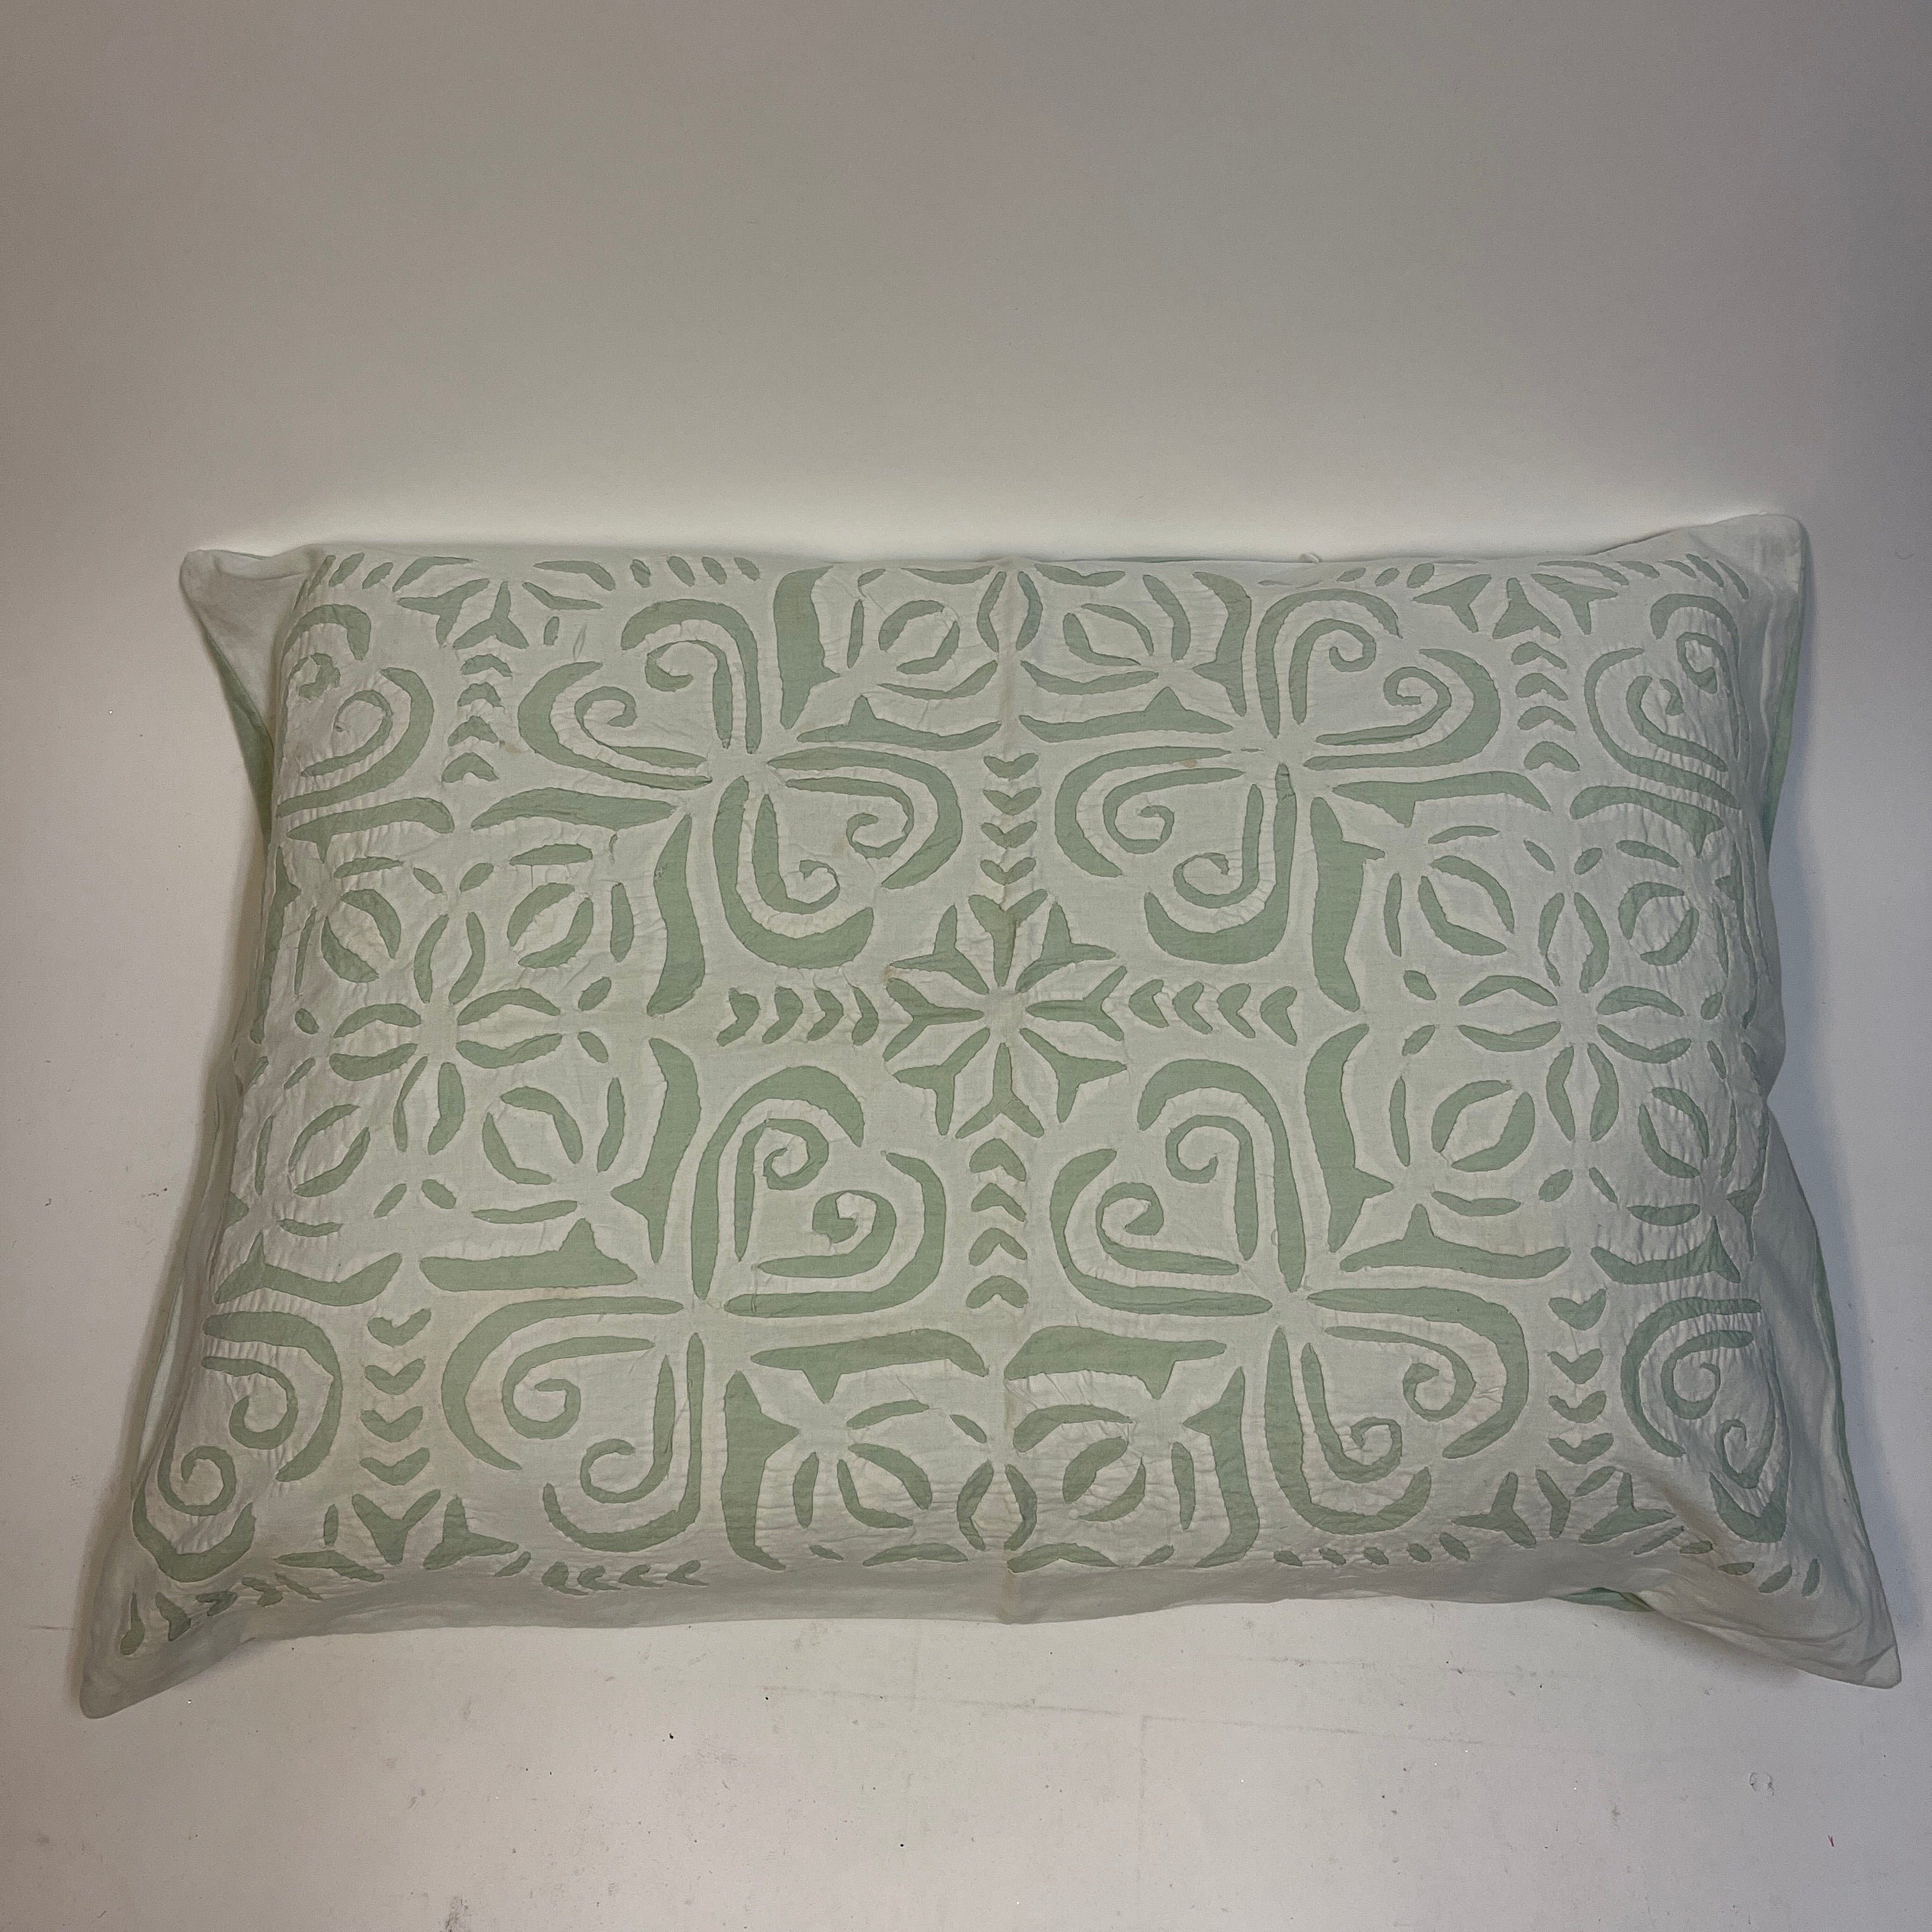 Pillow 1 - Vintage India NYC